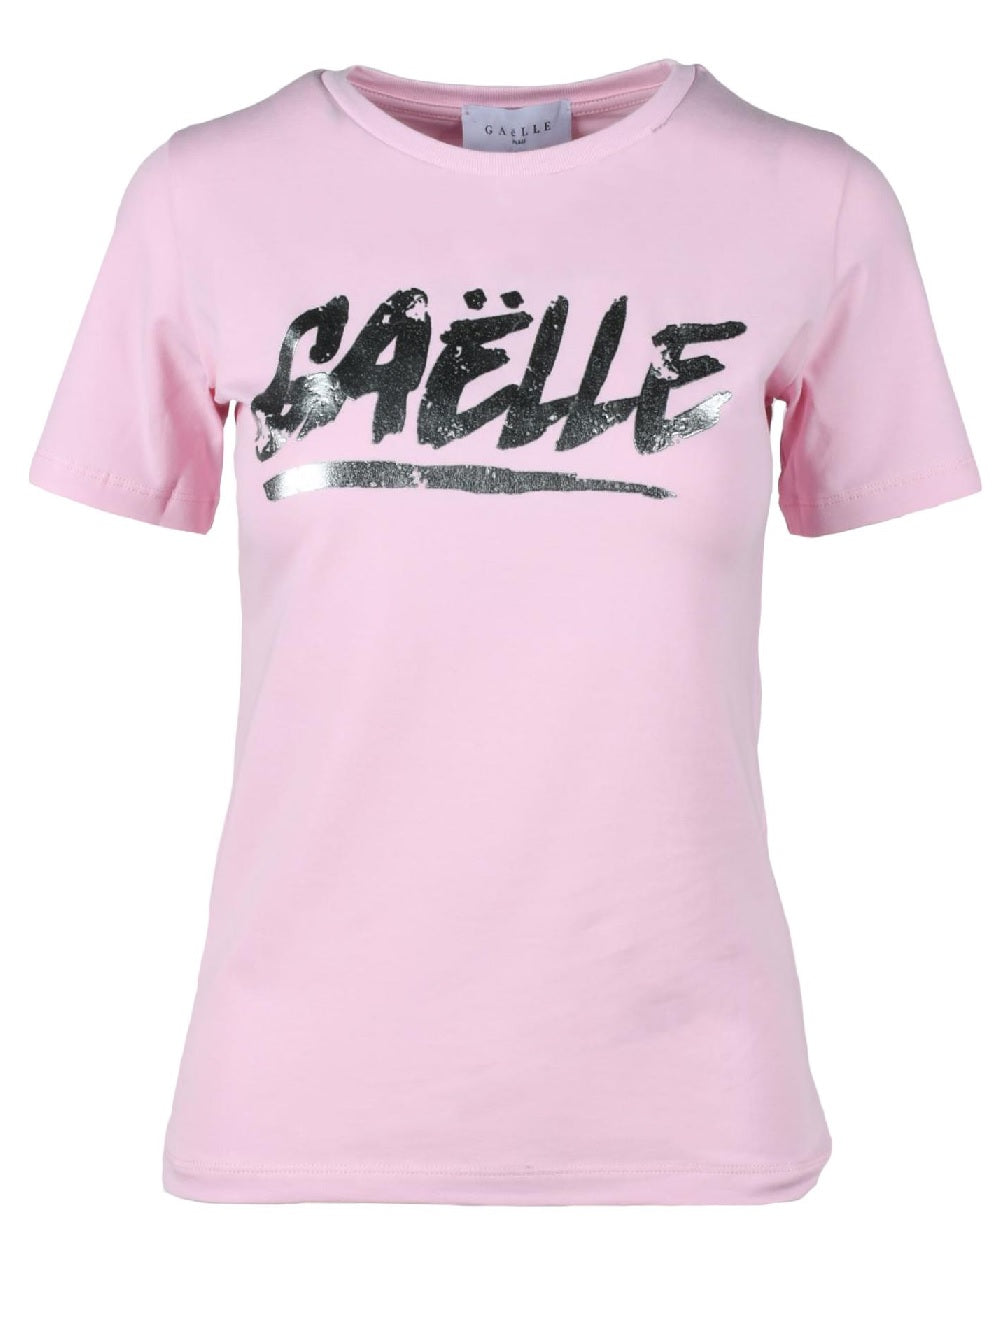 T Shirt Gaelle modello GBD11041STMM con stampa a contrasto